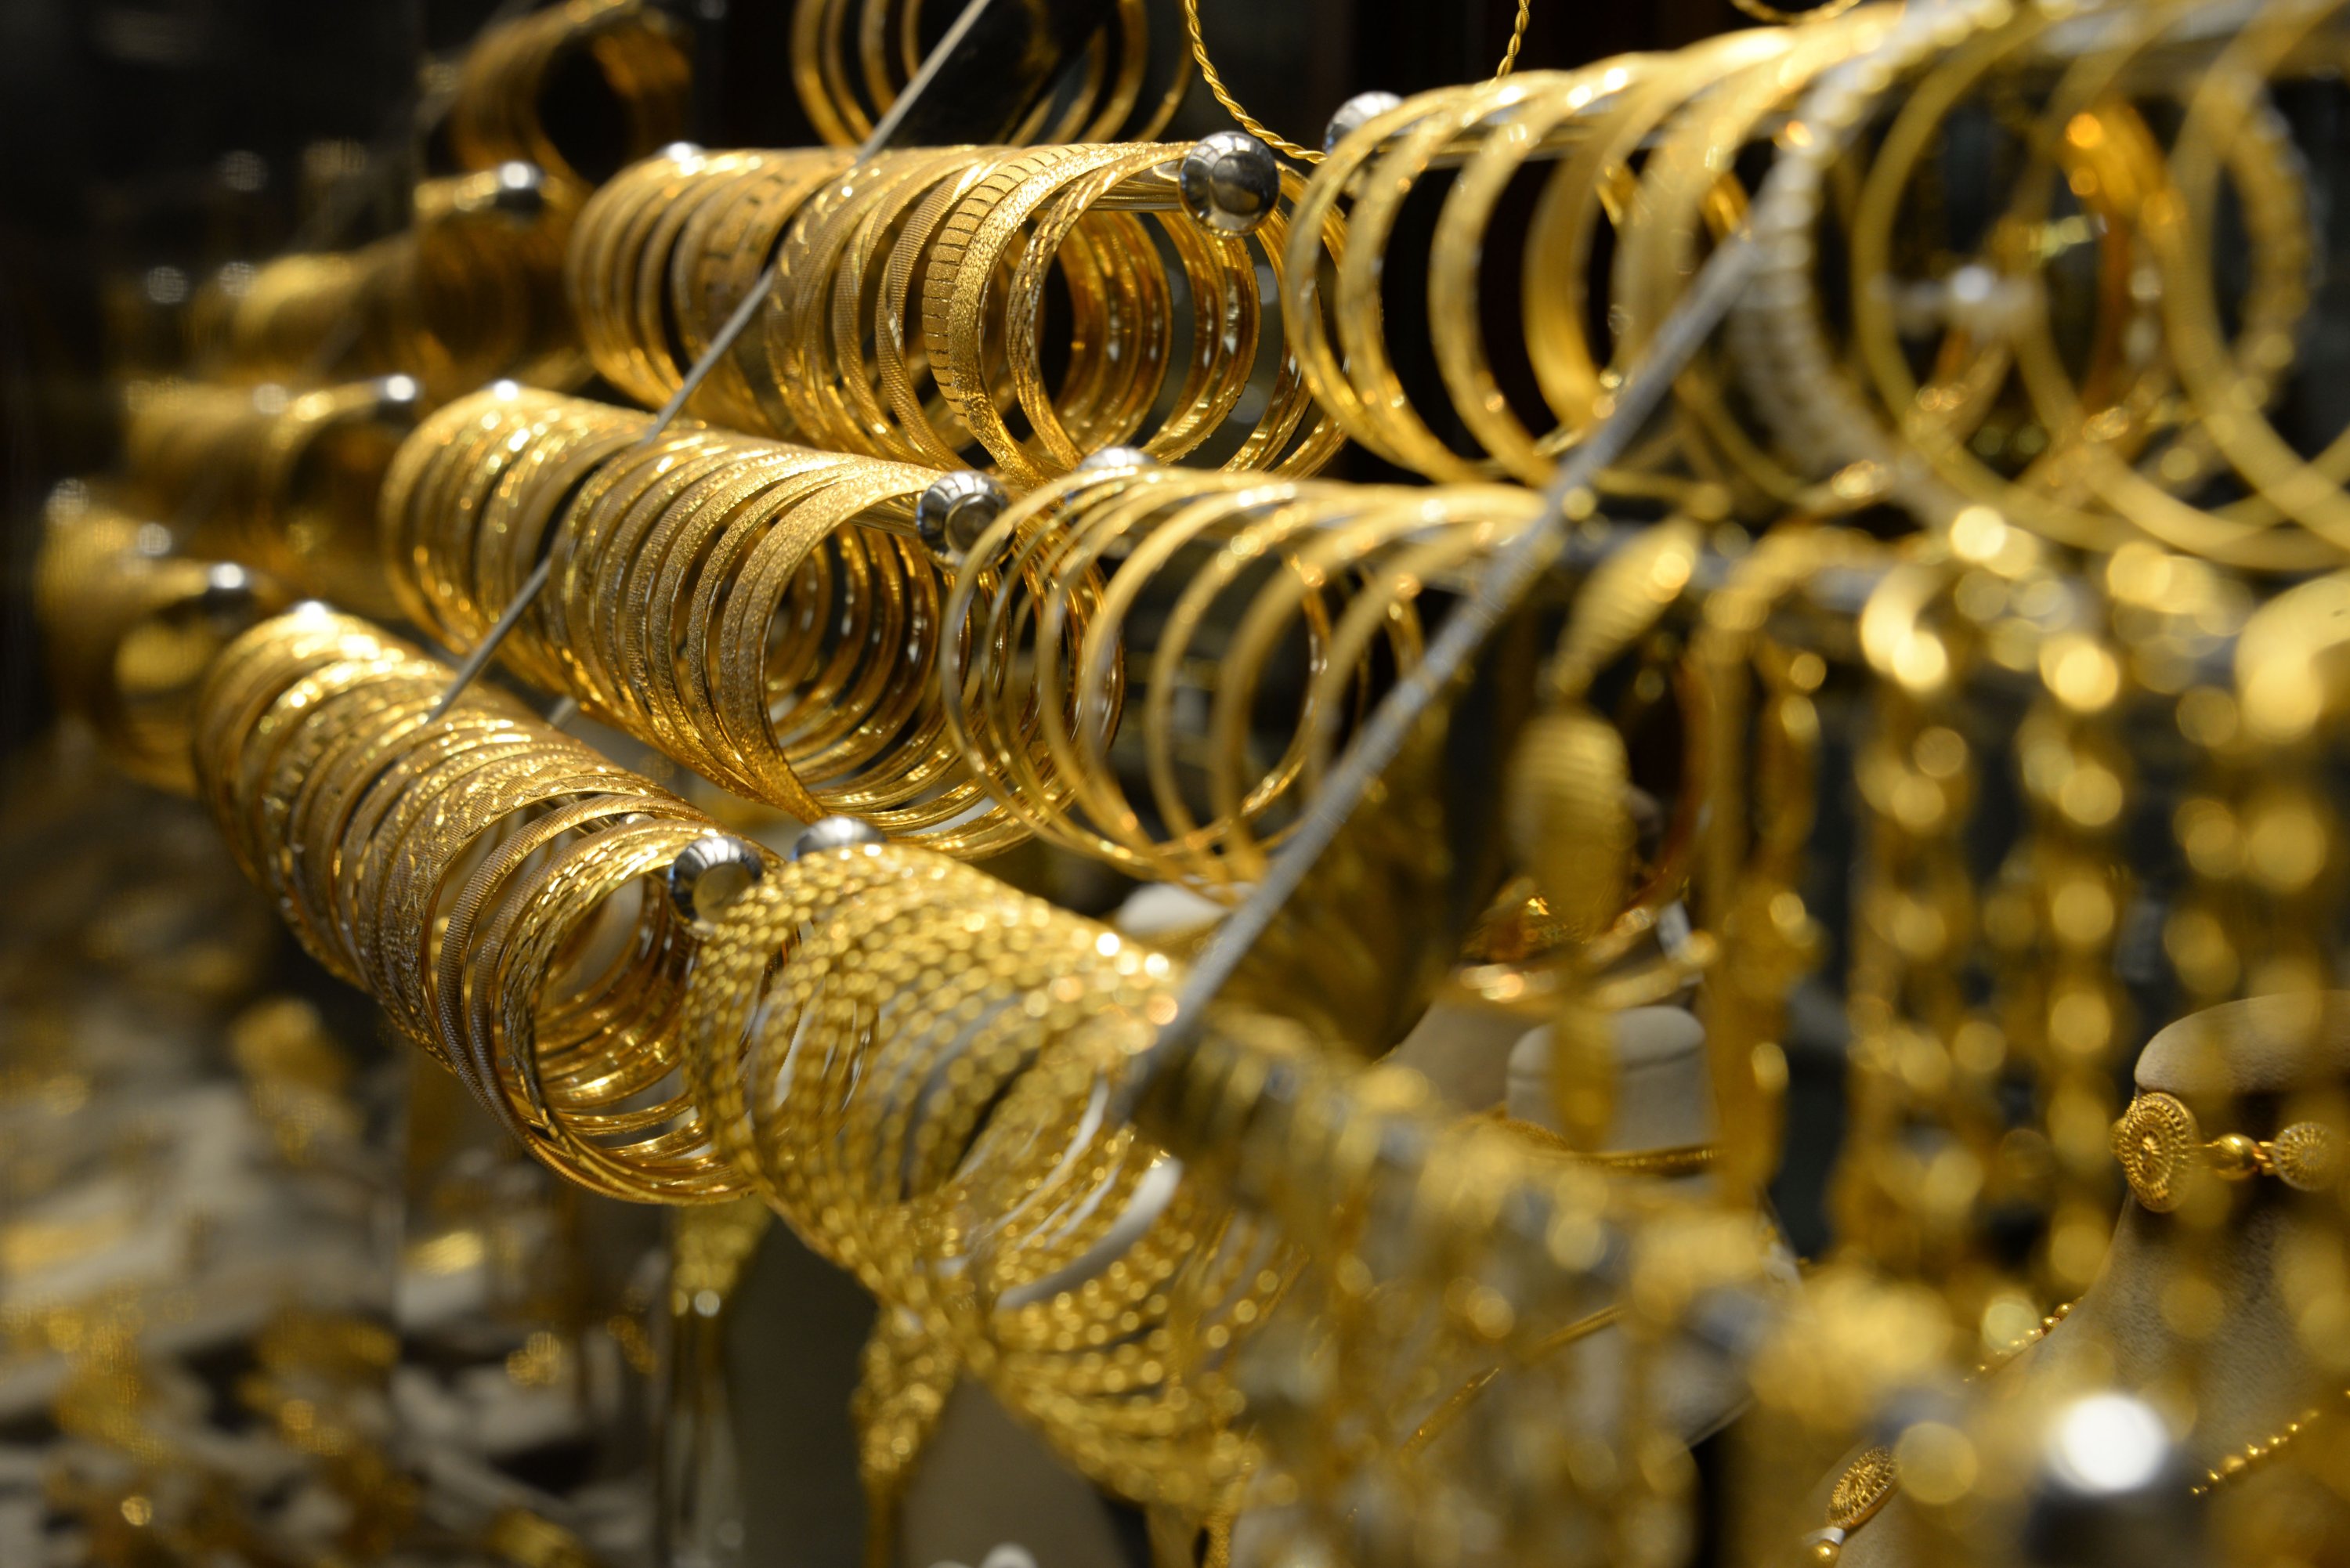 Gold bangles or jewelry are a popular choice of gift for newlyweds in Turkey. (iStock Photo)